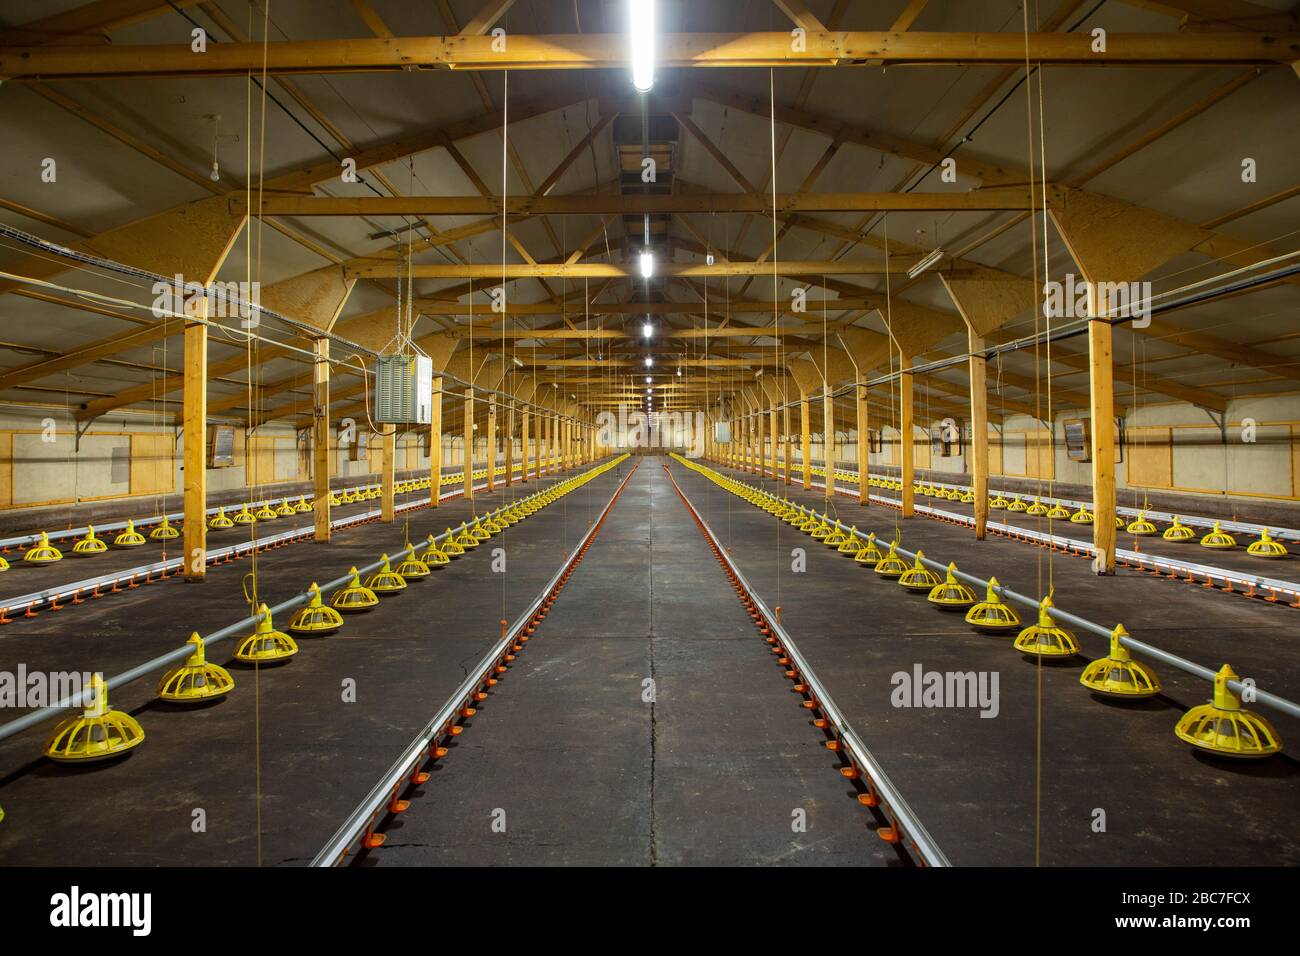 Interior view of an empty Industrial Chicken Shed Stock Photo